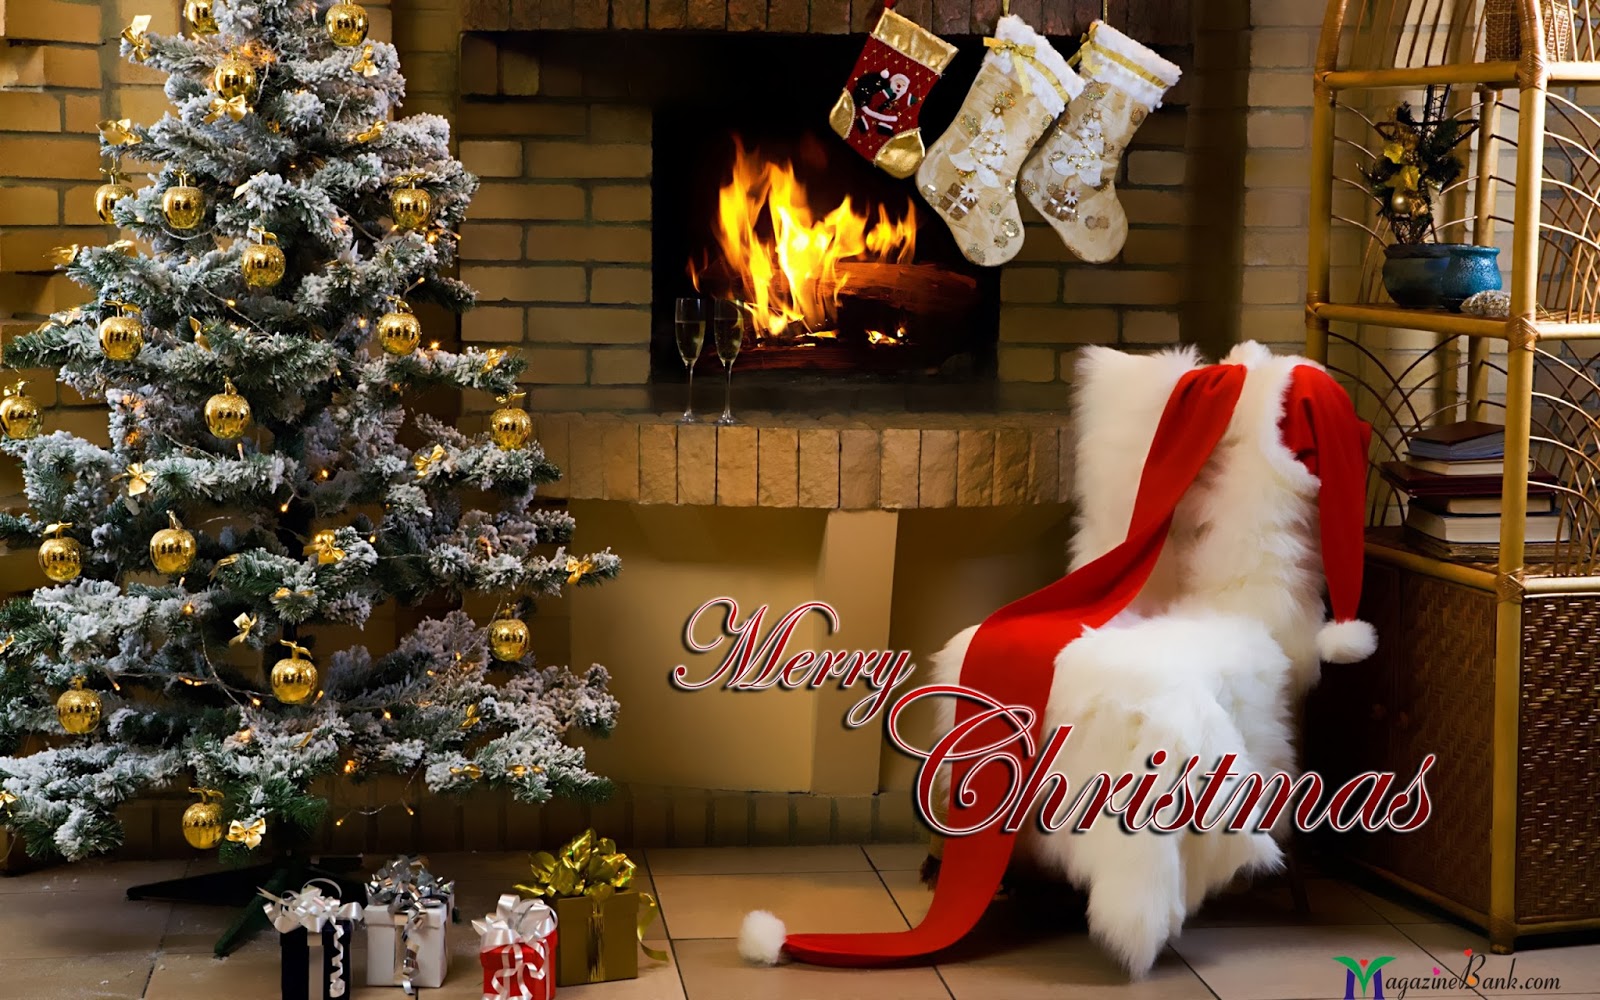 Merry Christmas Holiday Greetings Image And HD Wallpaper 1080p Sms